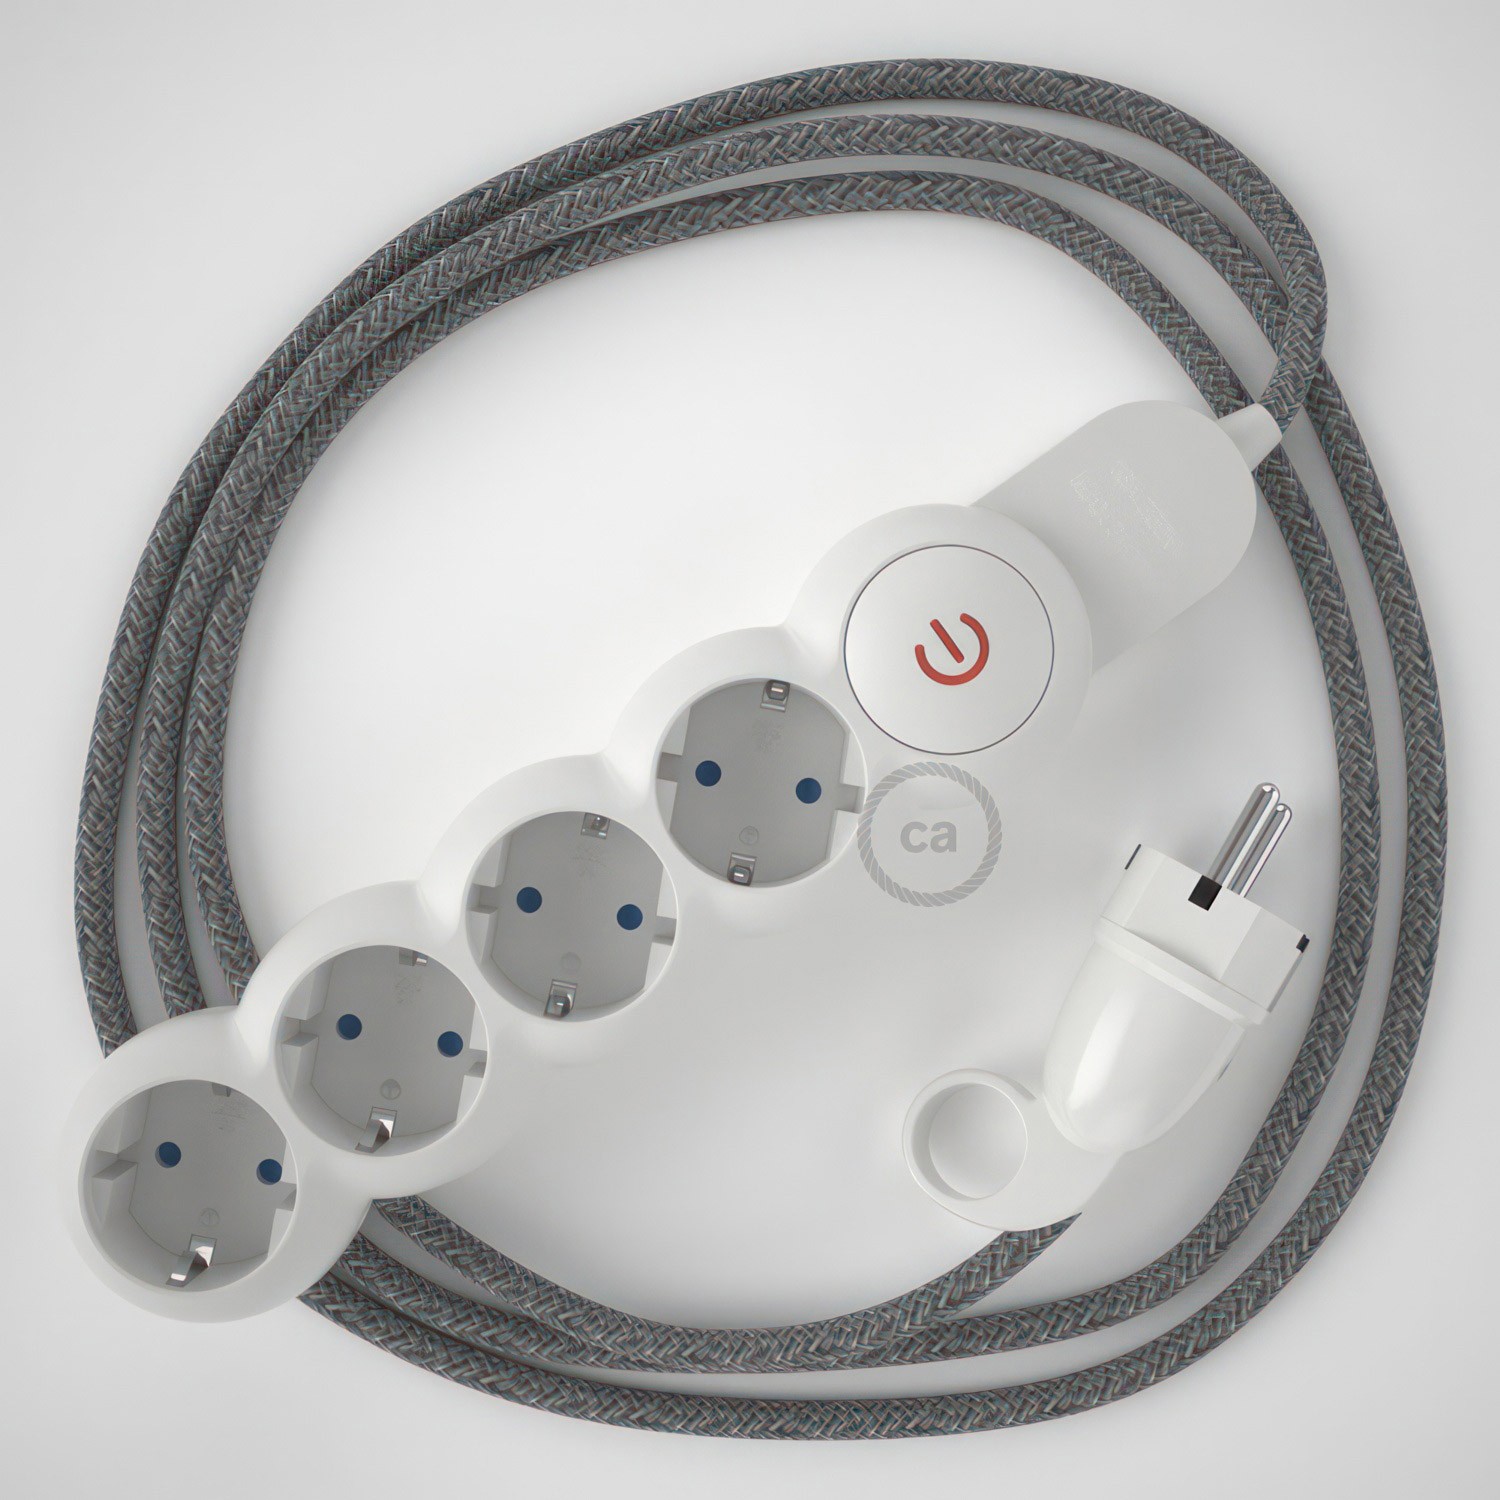 German Power Strip with electrical cable covered in Grey Natural Linen fabric RN02 and Schuko plug with confort ring